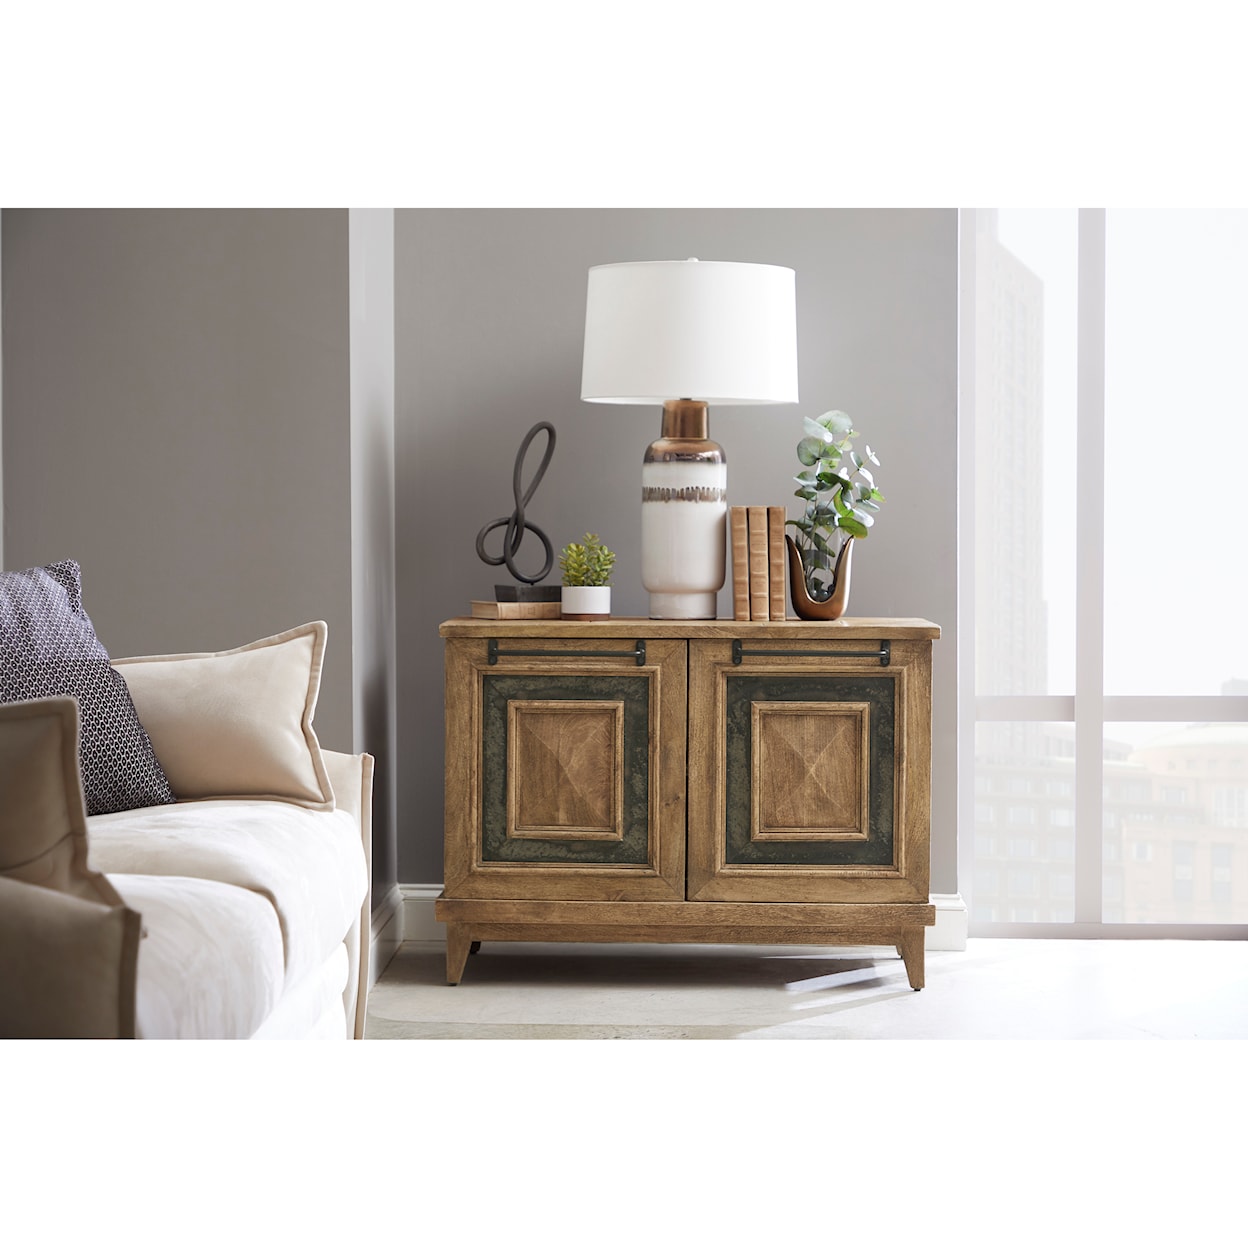 Accentrics Home Accents Stone Insert Two Door Chest